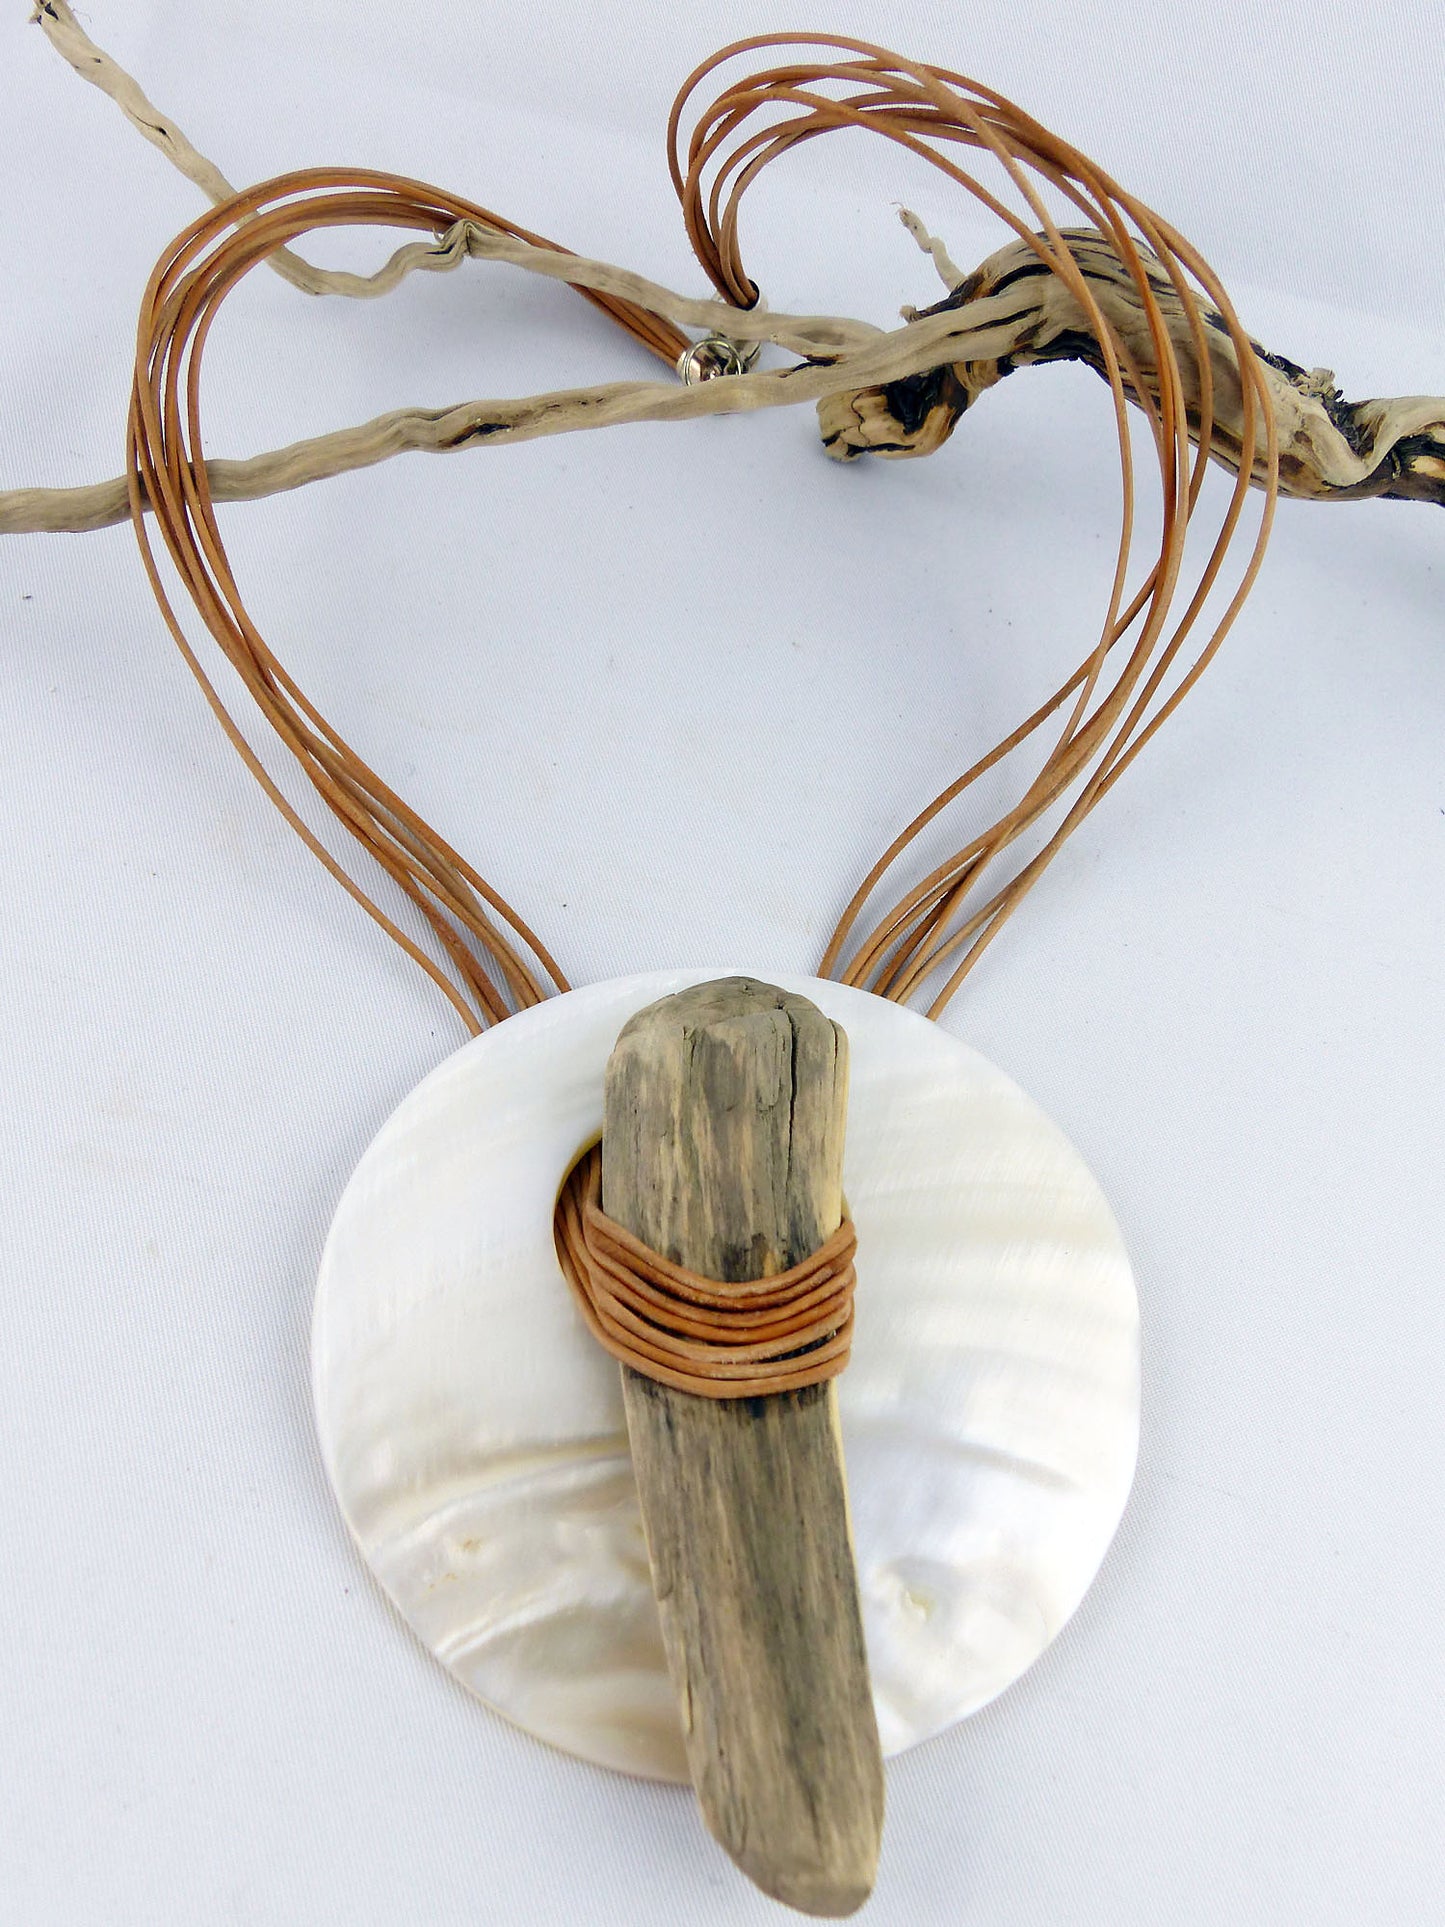 DRIFTWOOD Mother-of-pearl leather NECKLACE 'Gotland', sustainable handmade jewelry